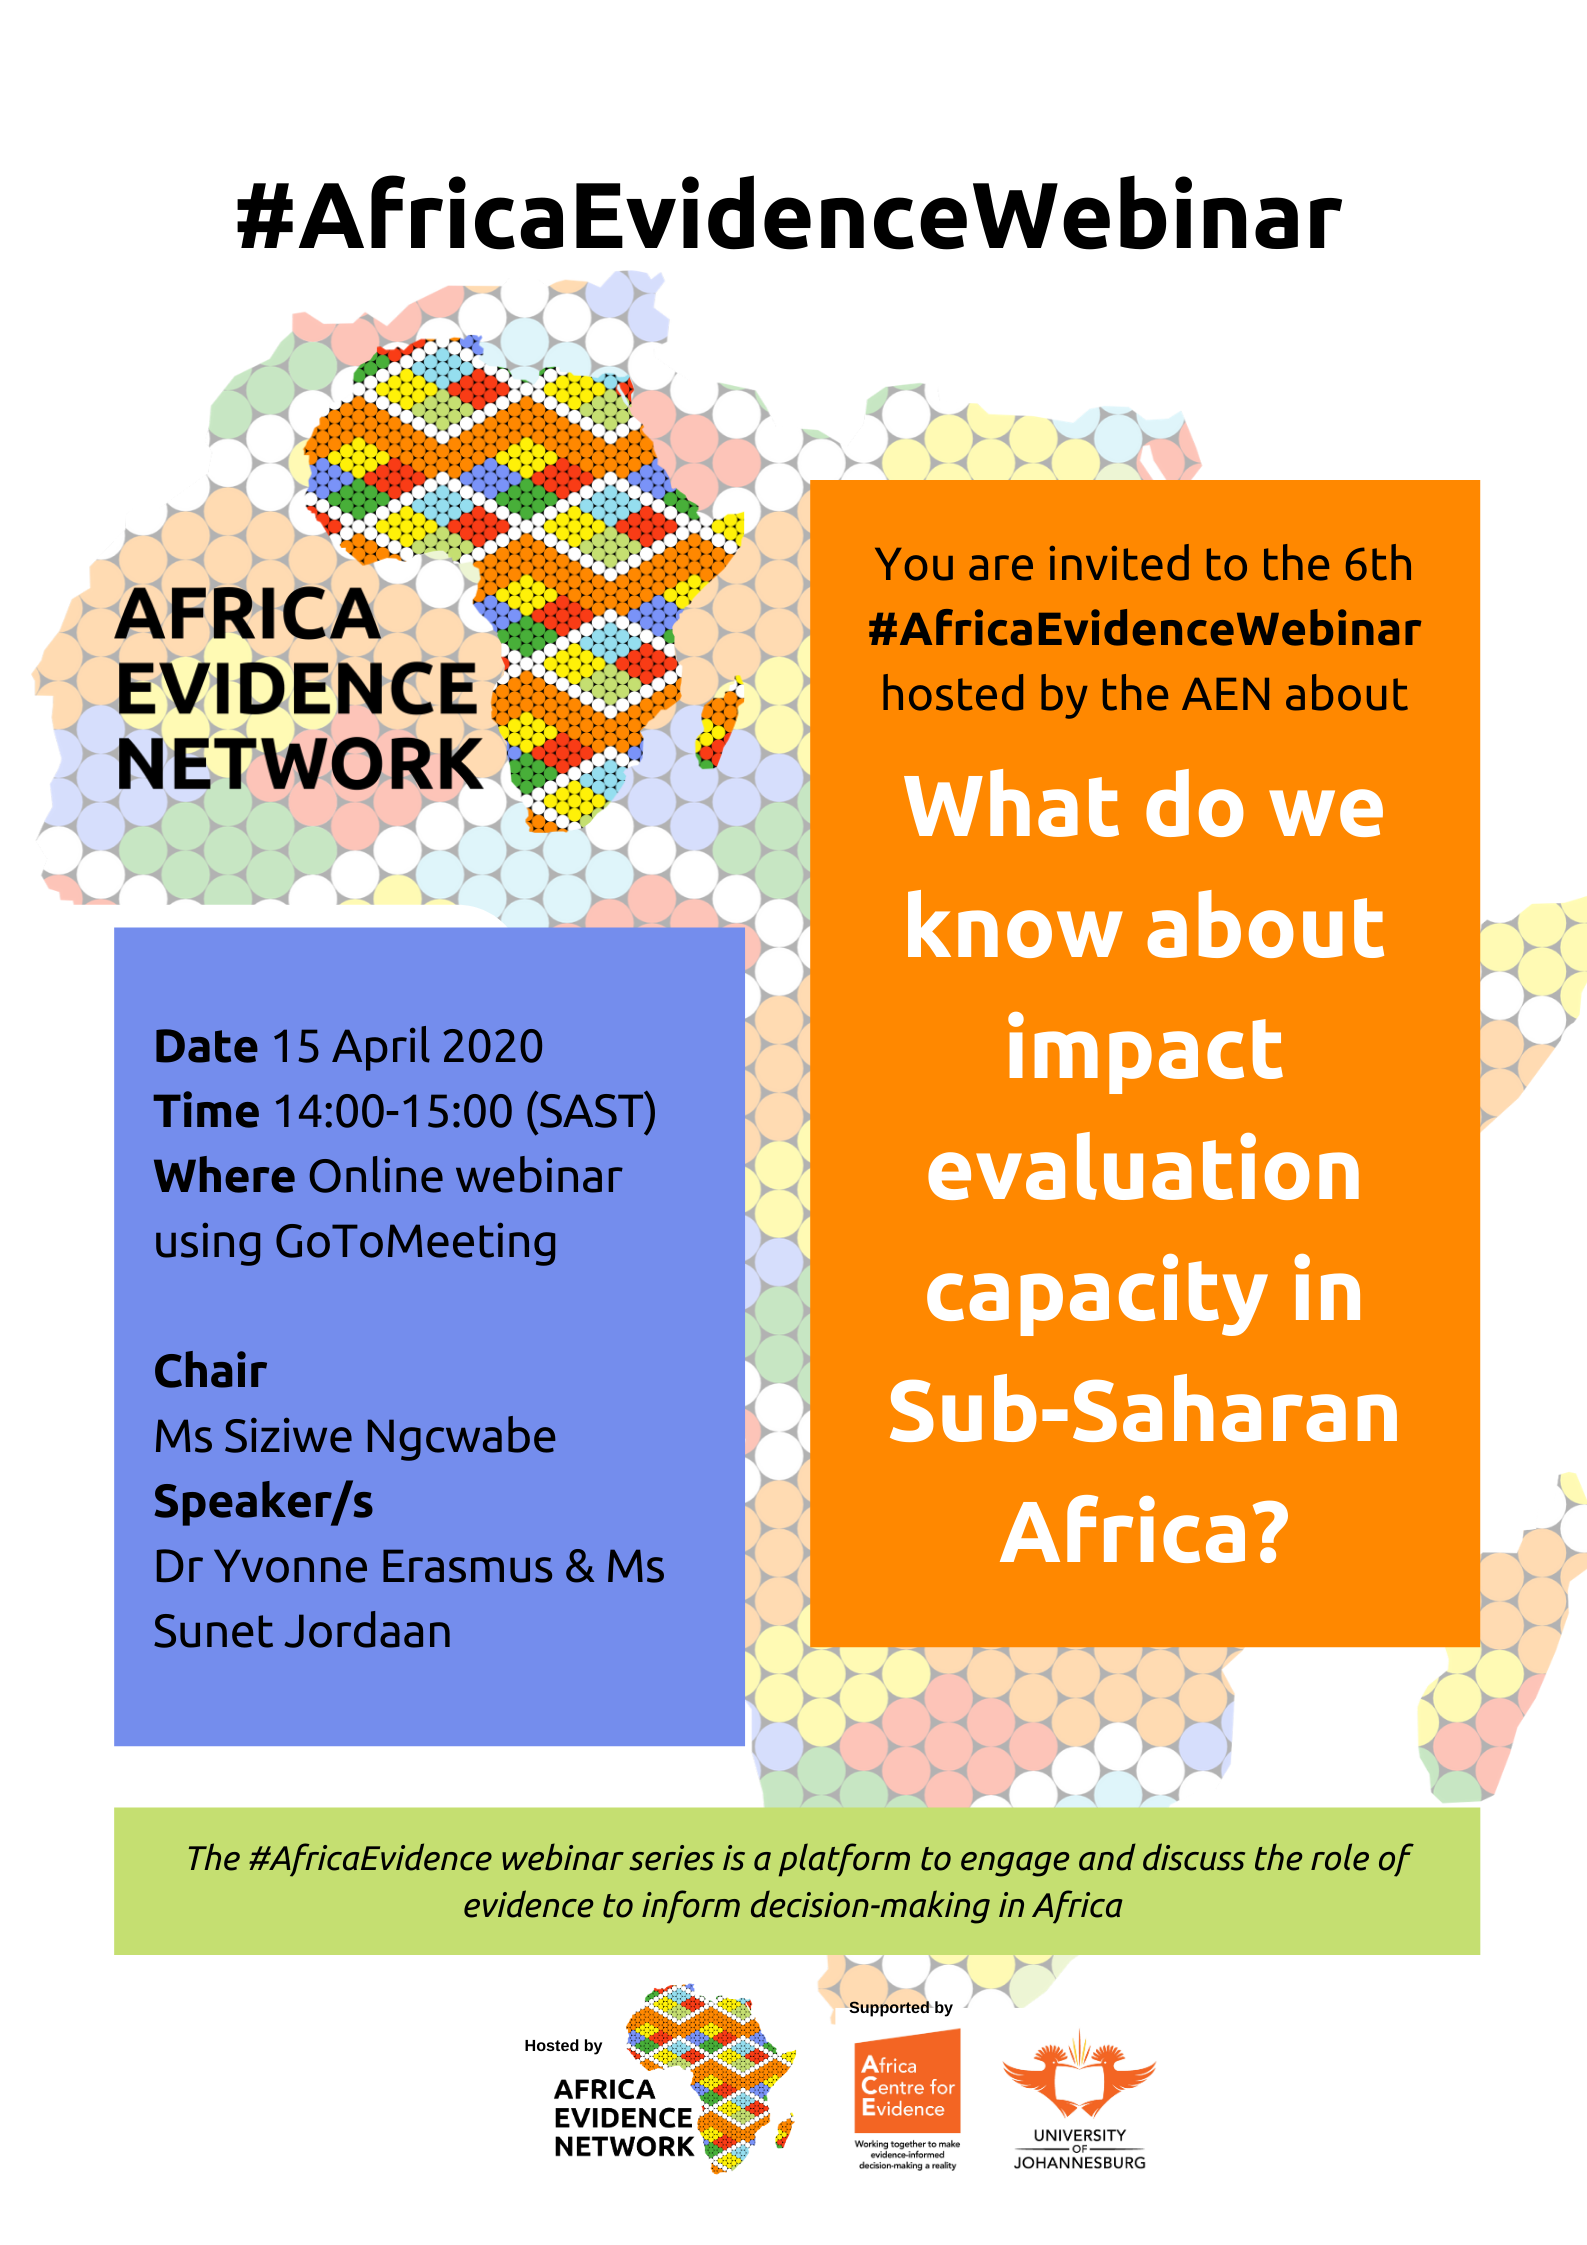 Africa Evidence Webinar #6: What do we know about impact evaluation capacity in Sub-Saharan Africa?